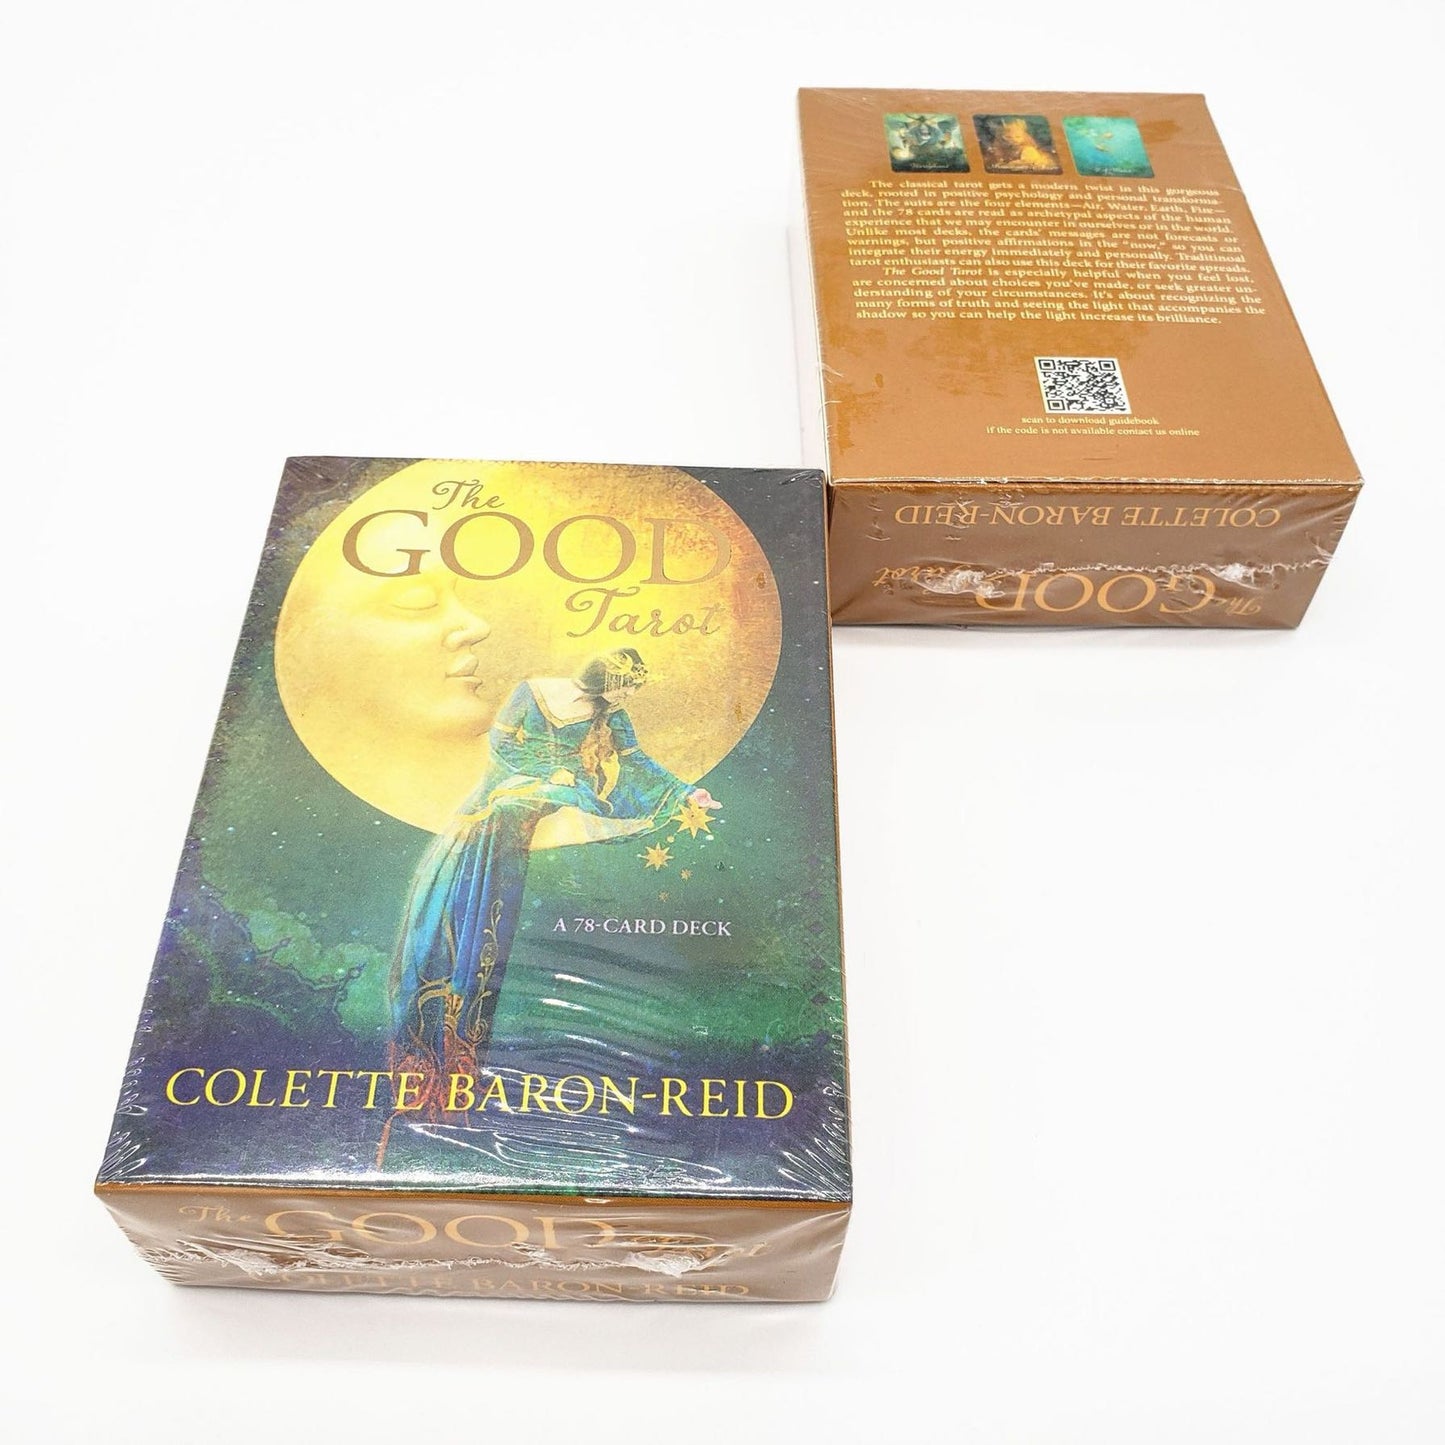 A box with a Good Tarot English Tarot book and a deck of cards by Maramalive™.